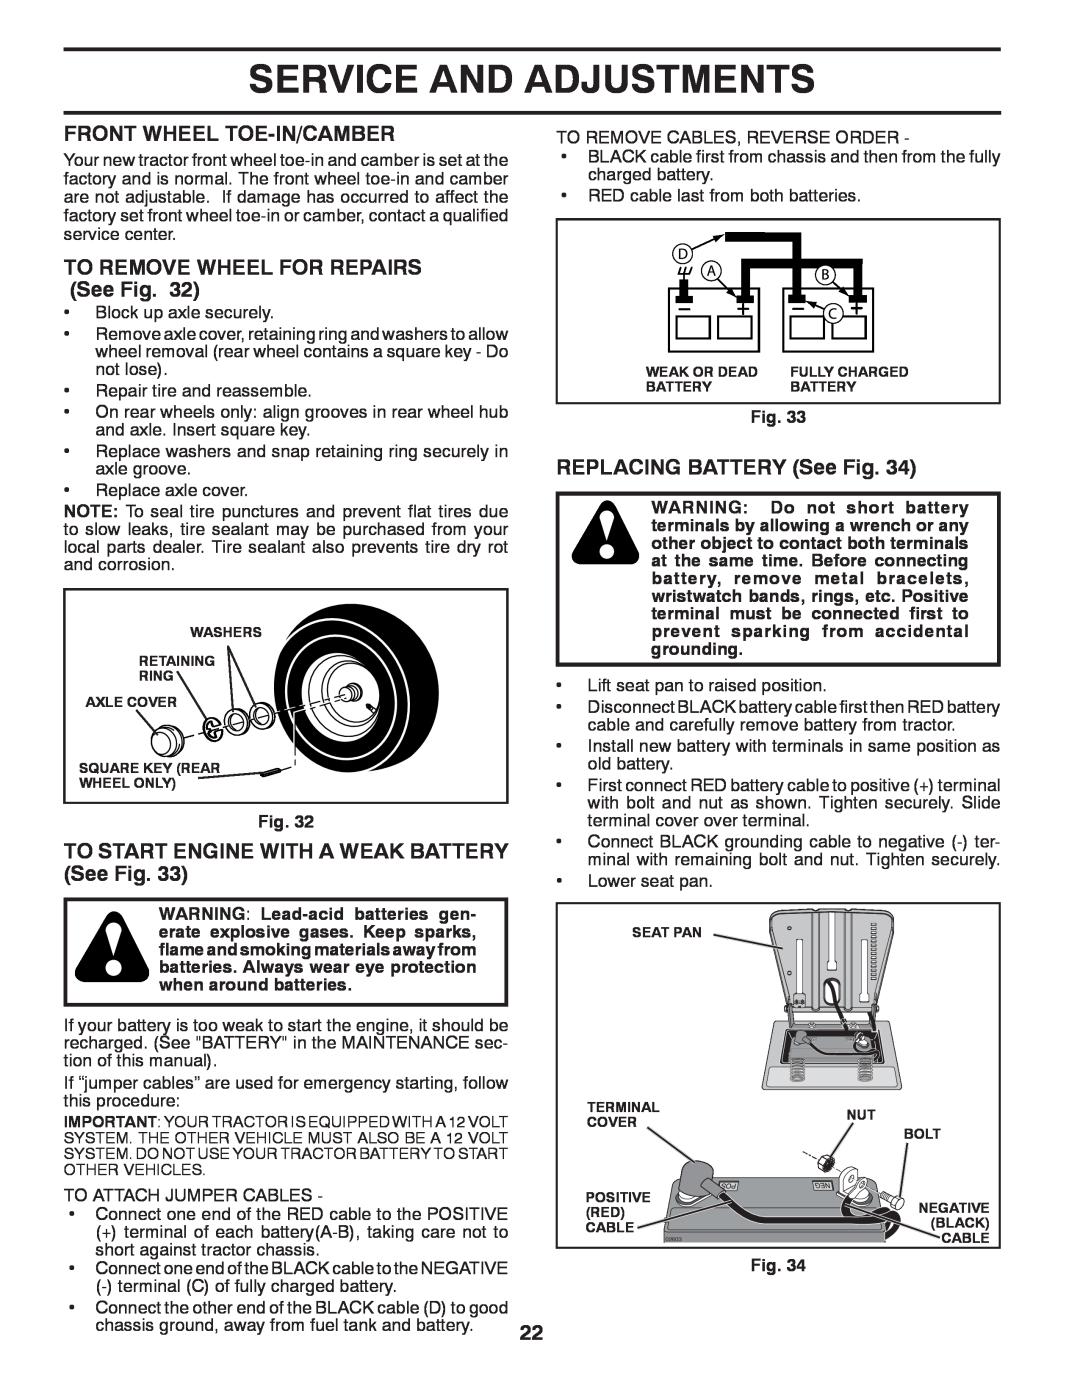 Husqvarna 917.24046 owner manual Front Wheel Toe-In/Camber, TO REMOVE WHEEL FOR REPAIRS See Fig, REPLACING BATTERY See Fig 